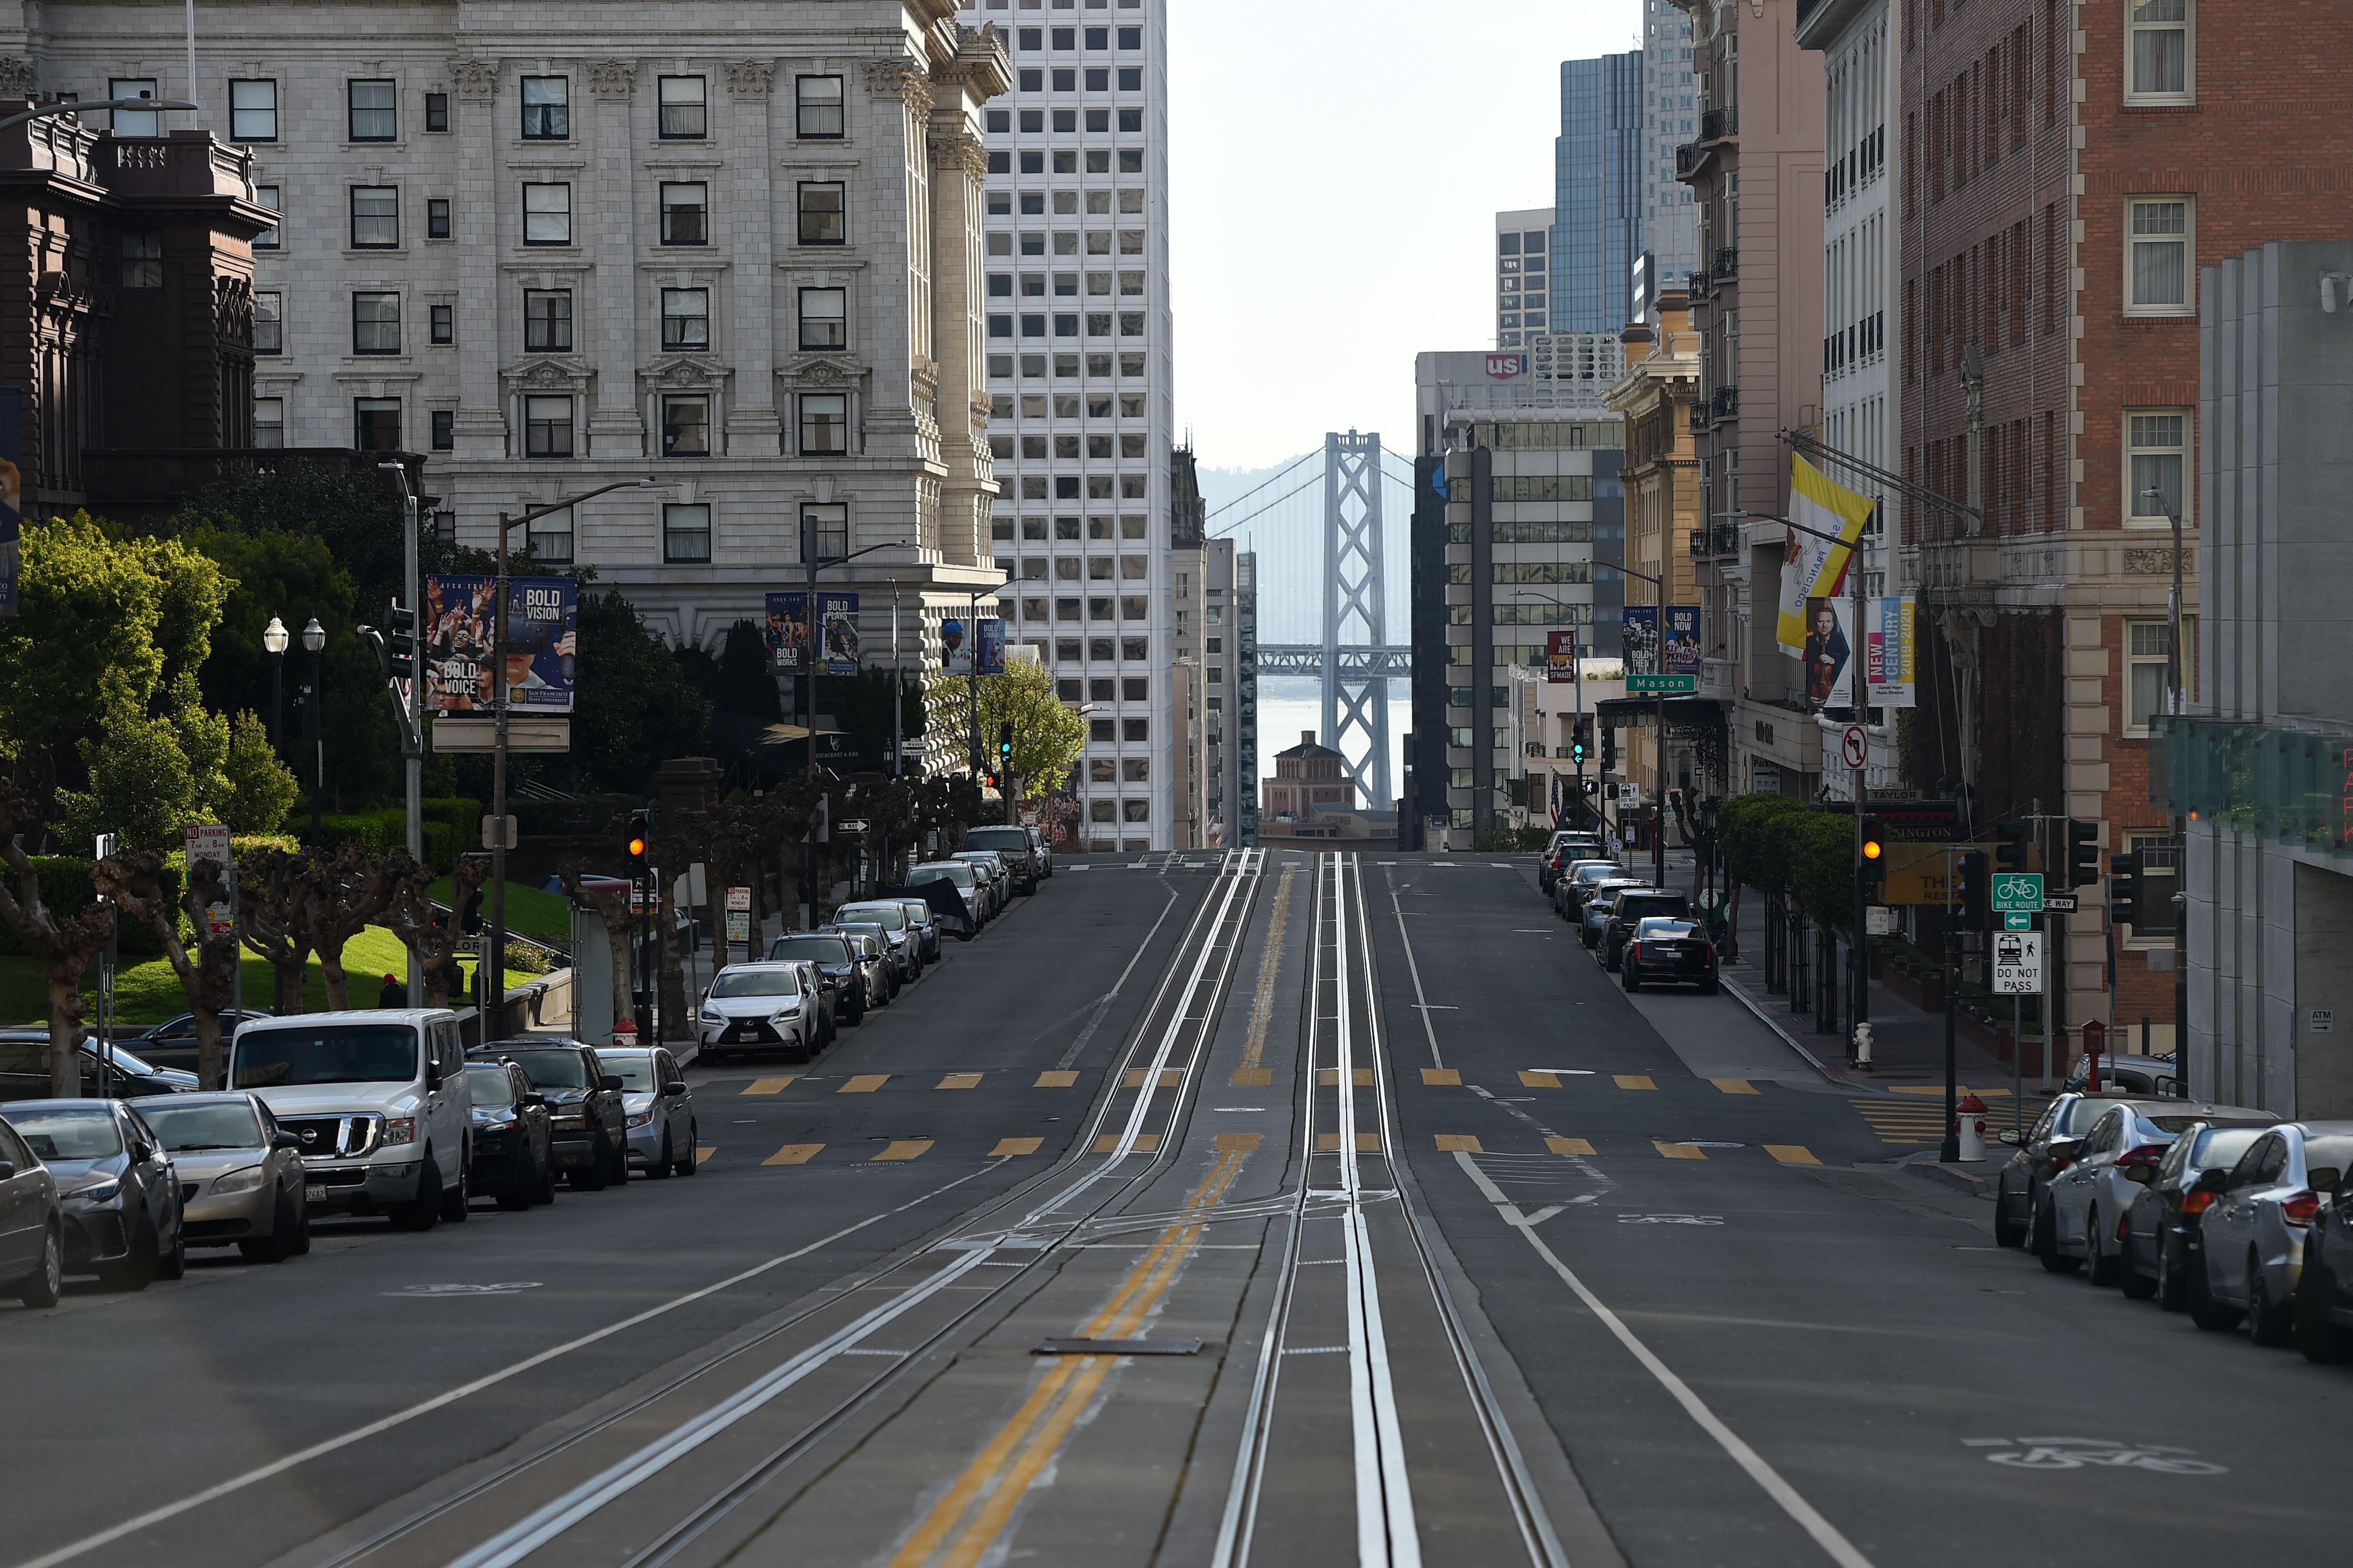 An empty street. The Golden Gate Bridge can be seen in the distance.